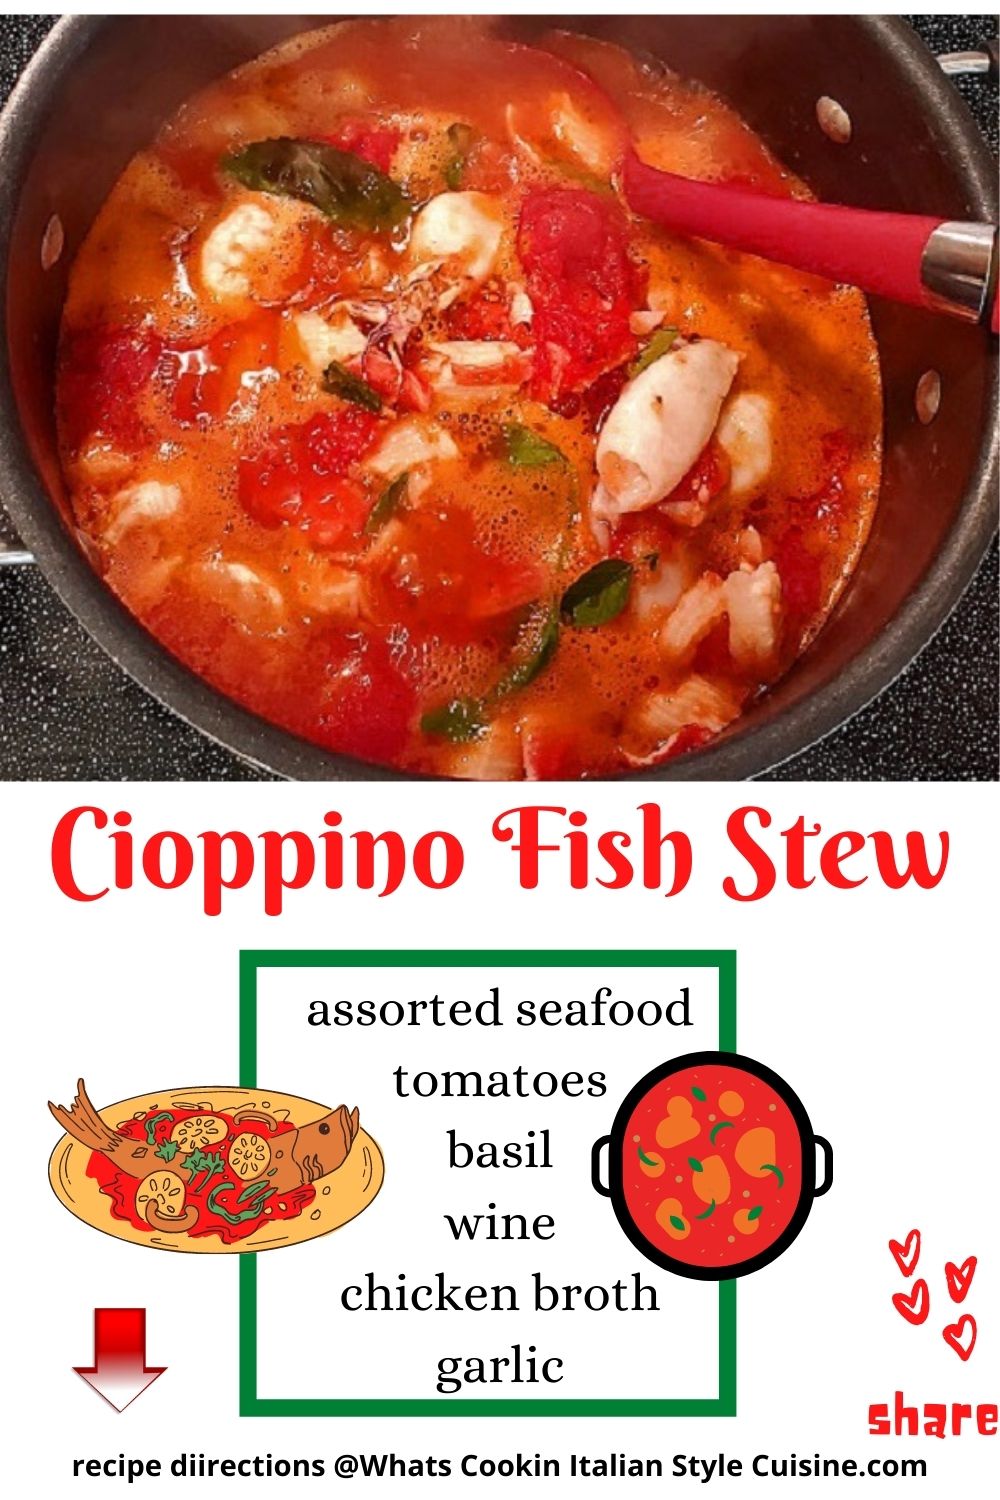 this is a pin on how to make Cioppino which is a fish stew